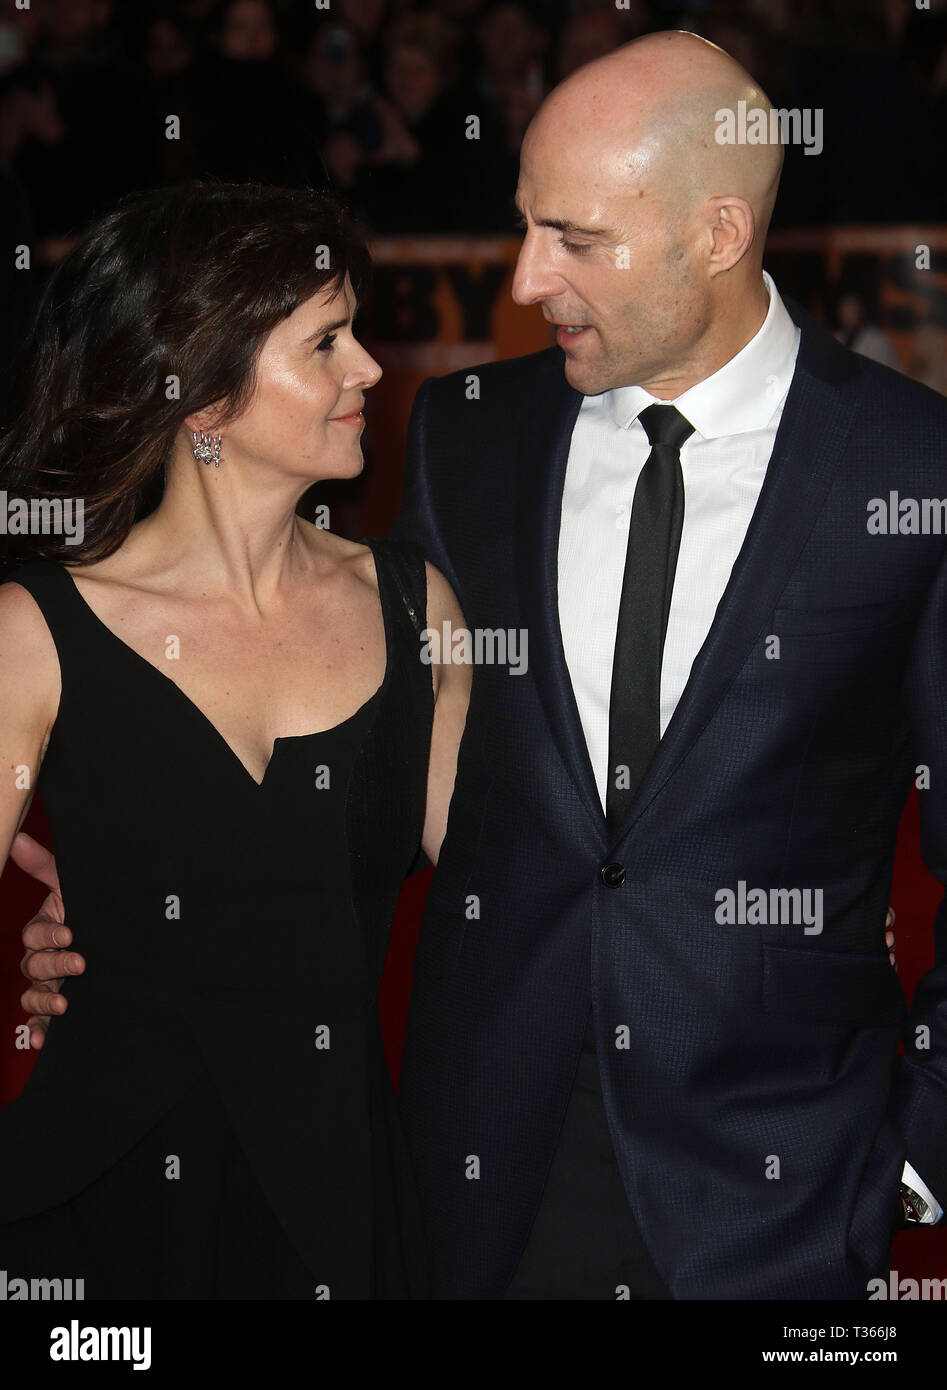 Feb 22, 2016 - London, England, UK - 'Grimsby' World Premiere, Odeon Leicester Square - Red Carpet Arrivals Photo Shows: Liza Marshall, Mark Strong Stock Photo